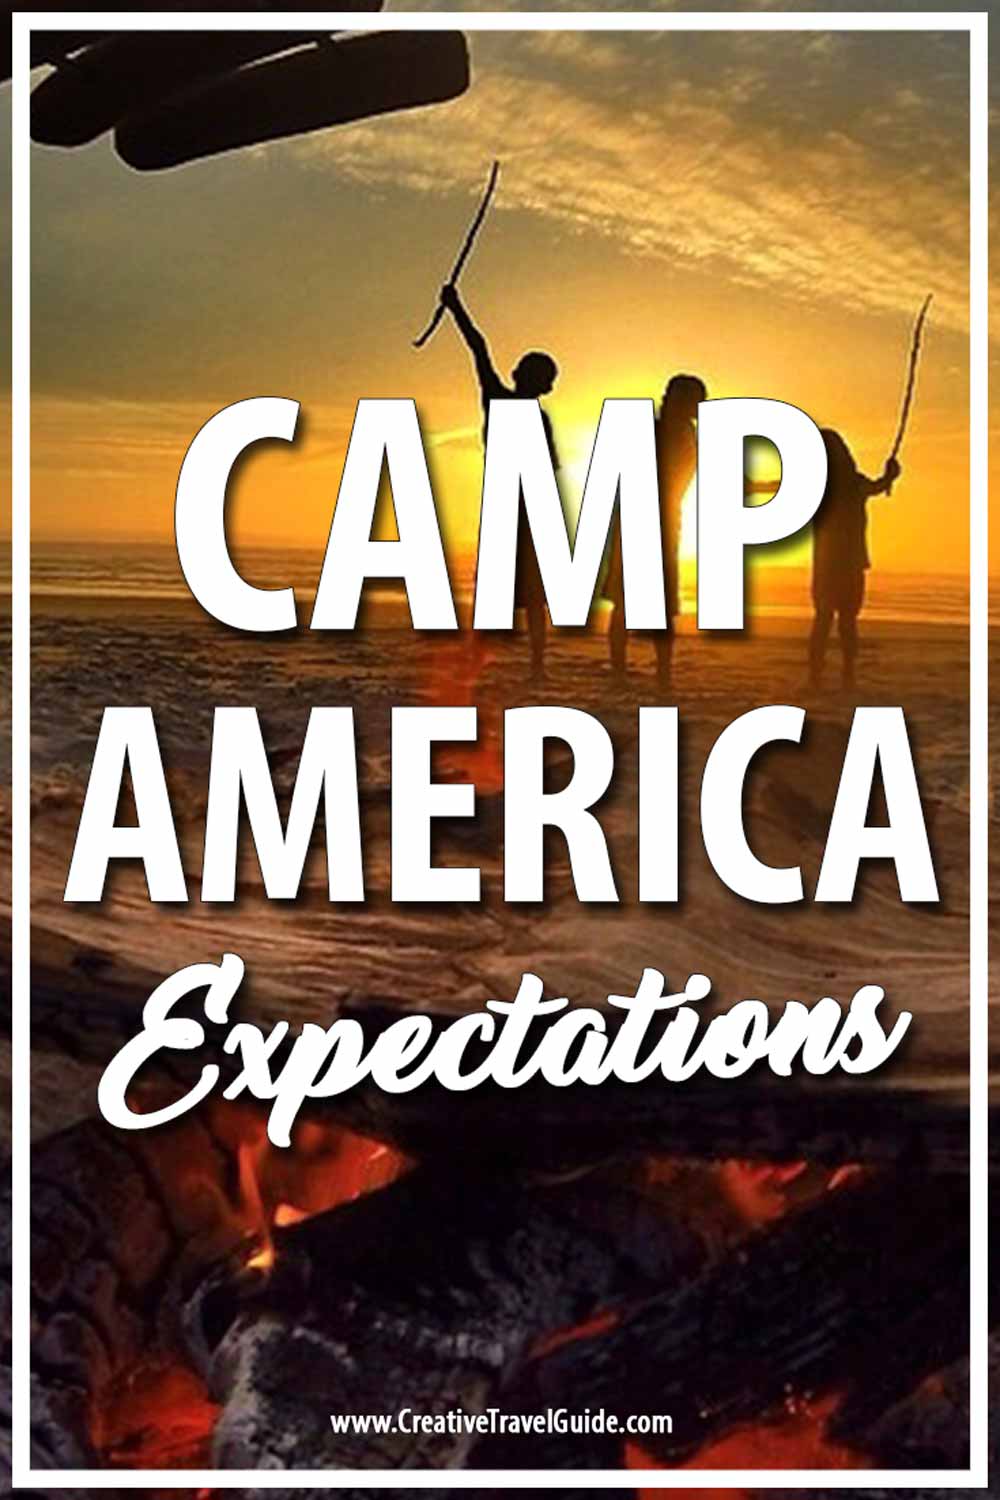 Camp America expectations